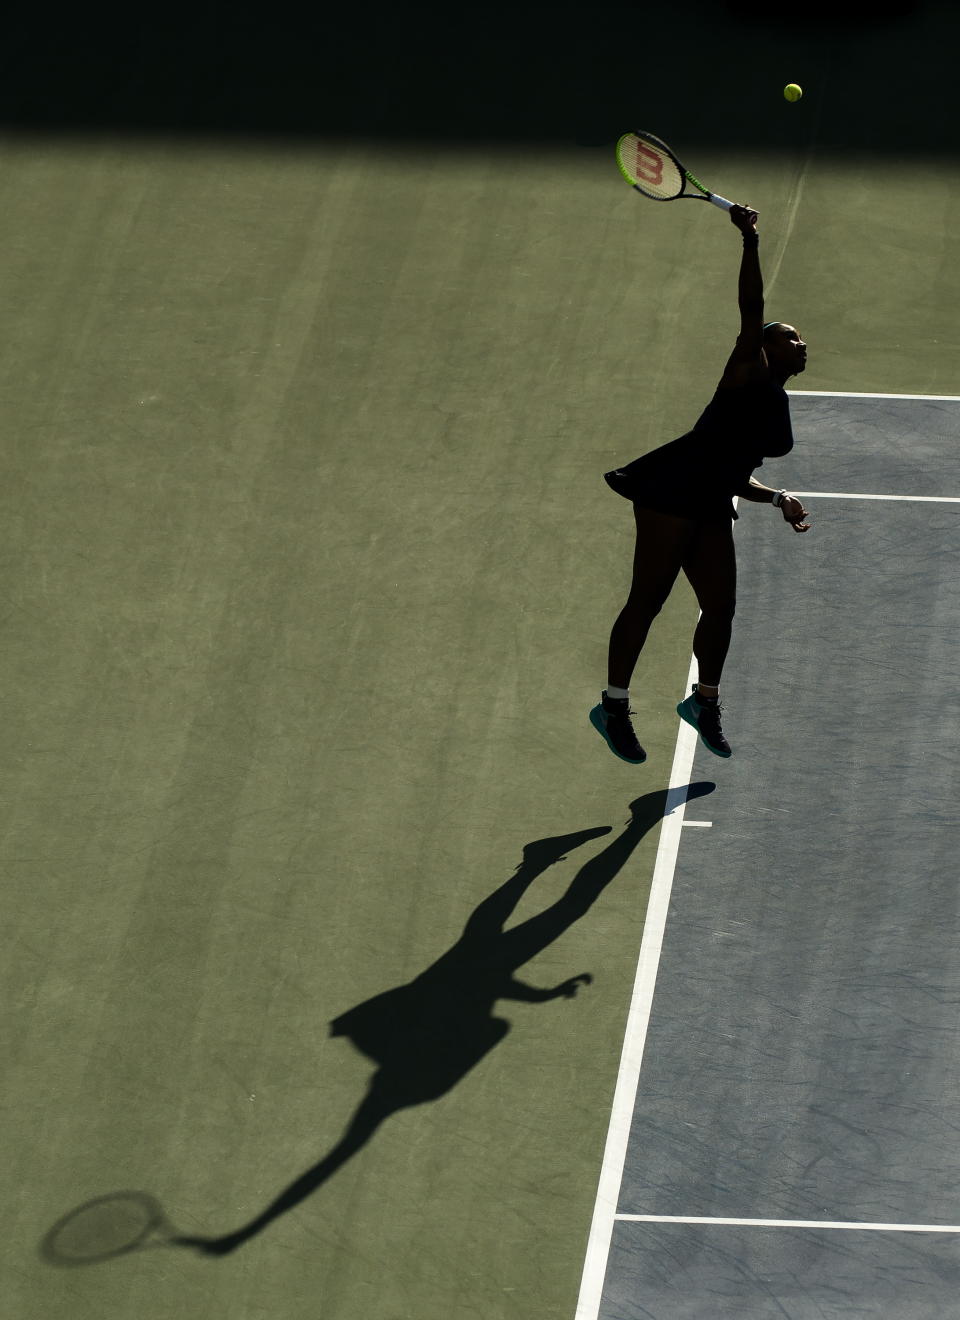 Serena Williams, of the United States, serves the ball against Marie Bouzkova, of the Czech Republic, during semifinal Rogers Cup tennis tournament action in Toronto, Saturday, Aug. 10, 2019. (Nathan Denette/The Canadian Press via AP)